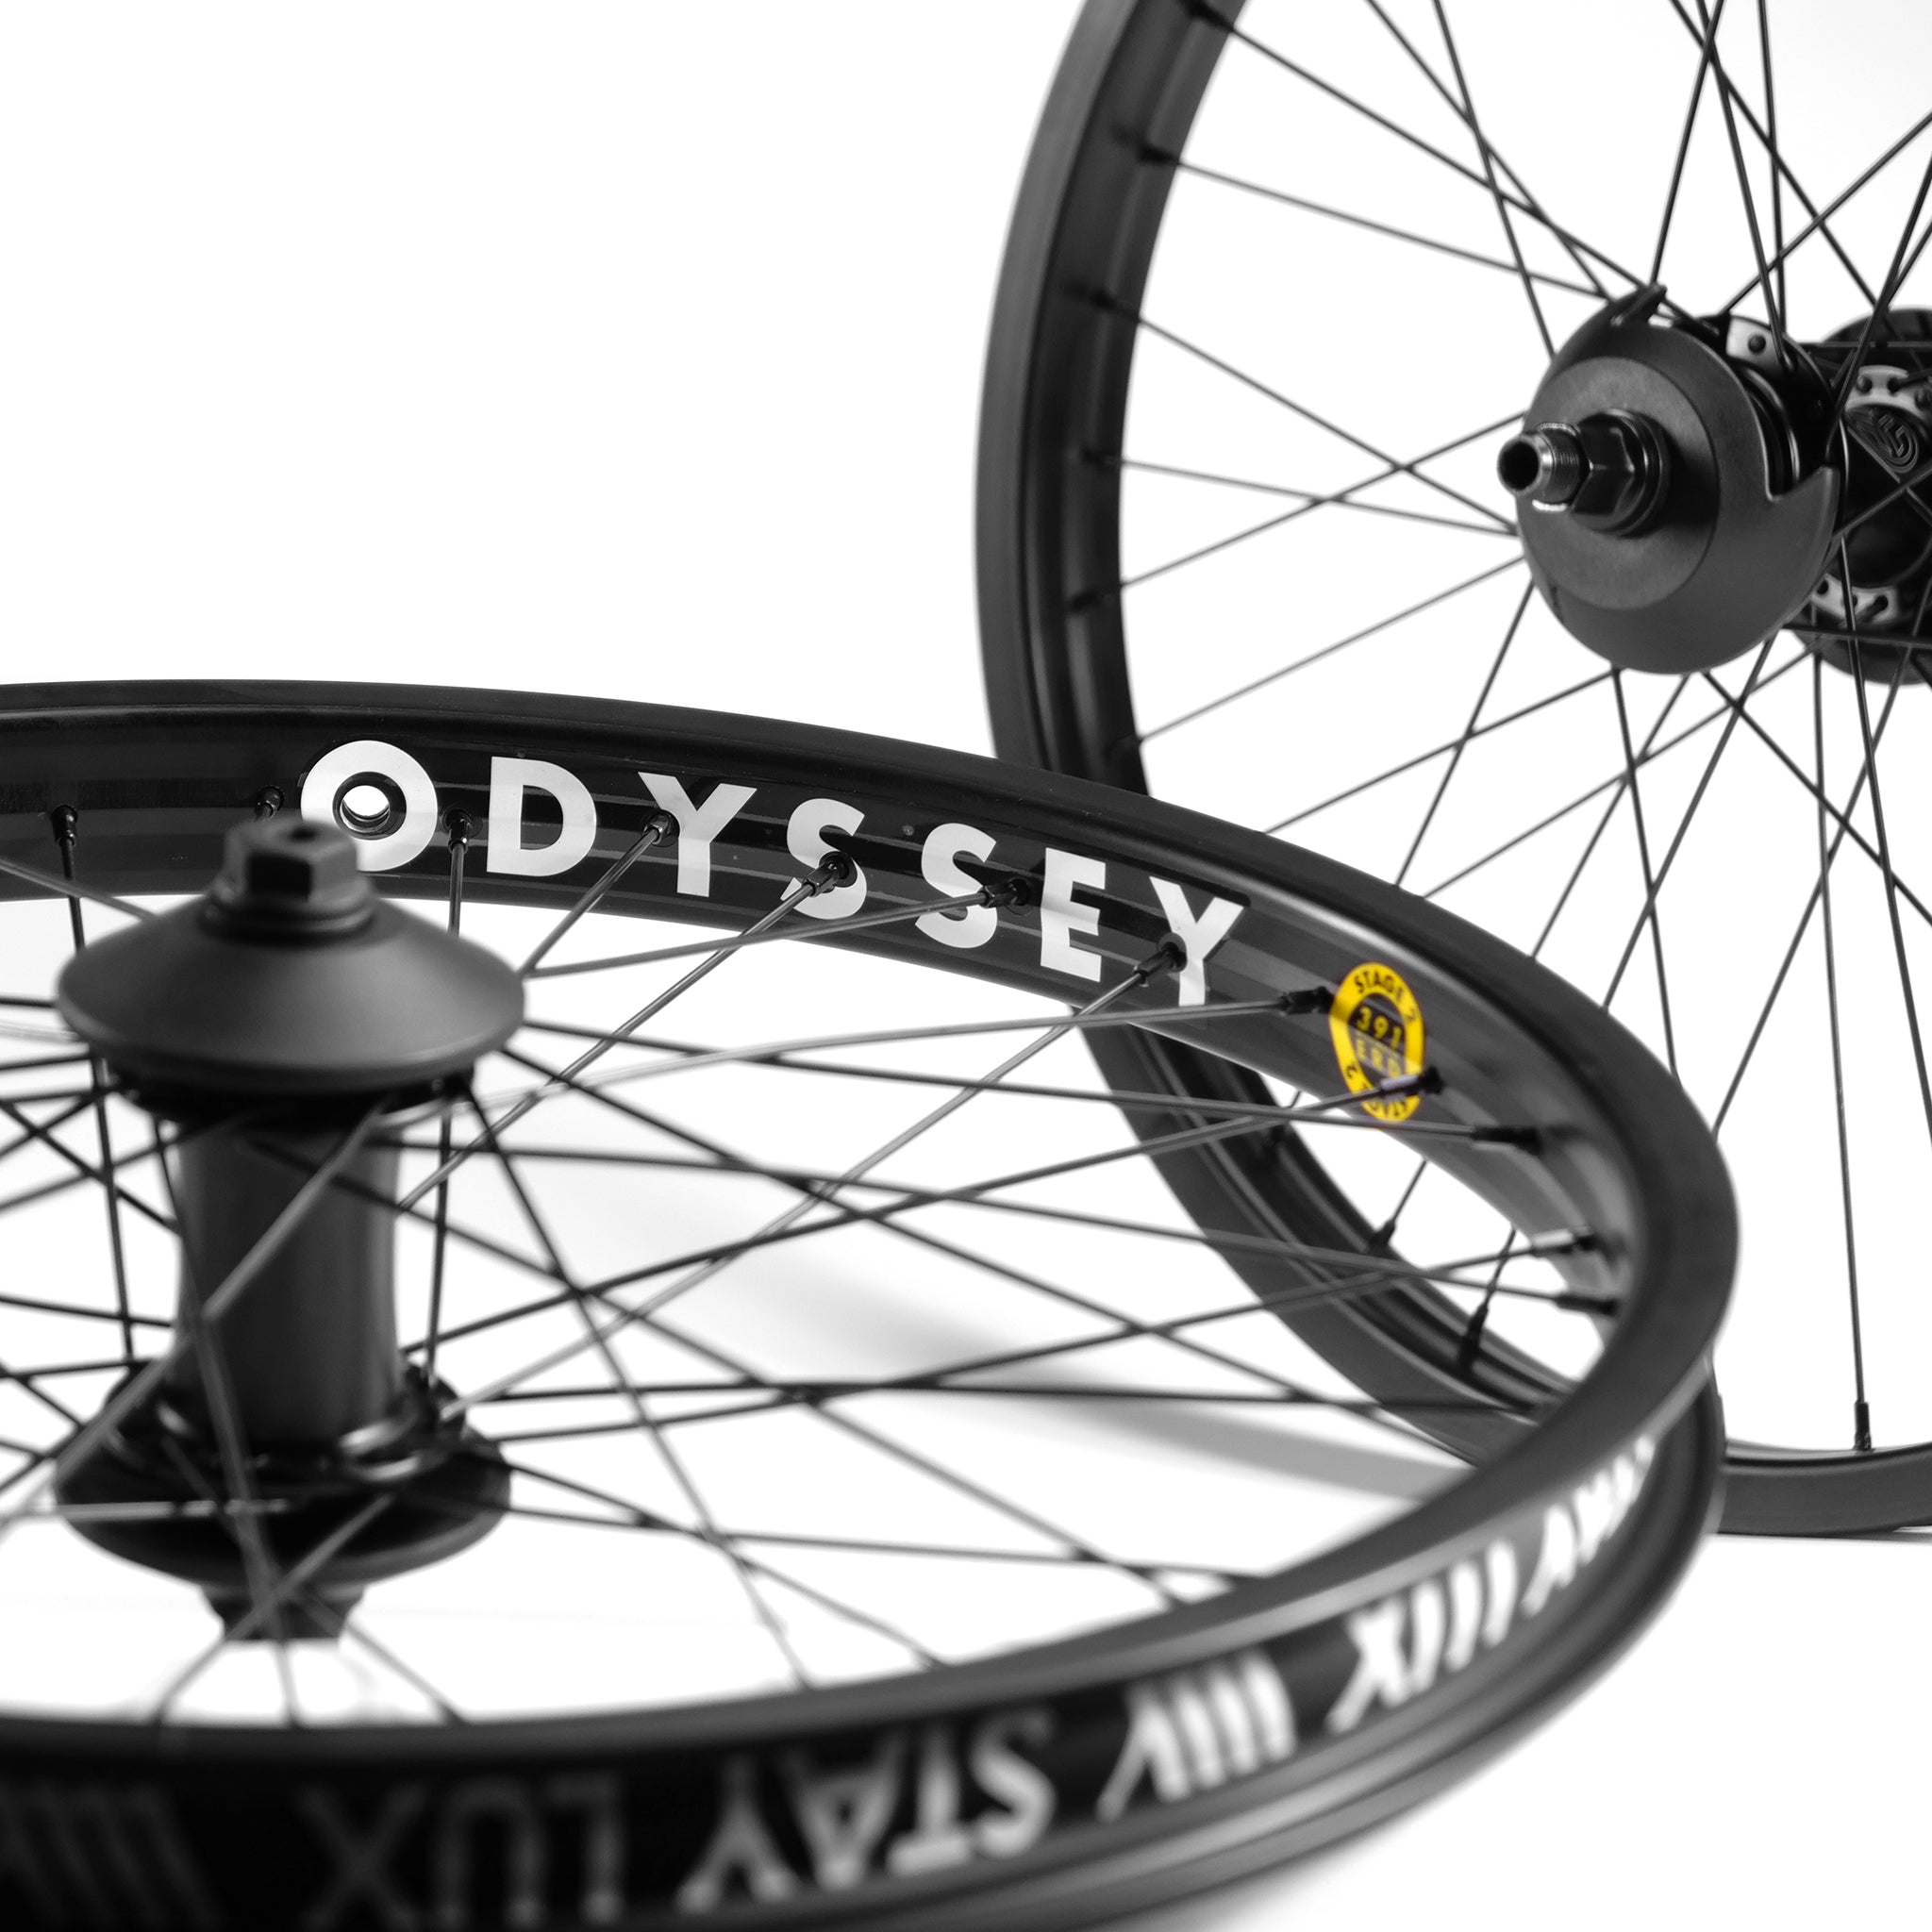 A close-up view of two bicycle wheels with black spokes, featuring a Federal Motion x Odyssey Stage 2 Custom Wheelset. The word "ODYSSEY" is printed in white on one of the rims, reminiscent of the sleek designs Boyd Hilder favors.